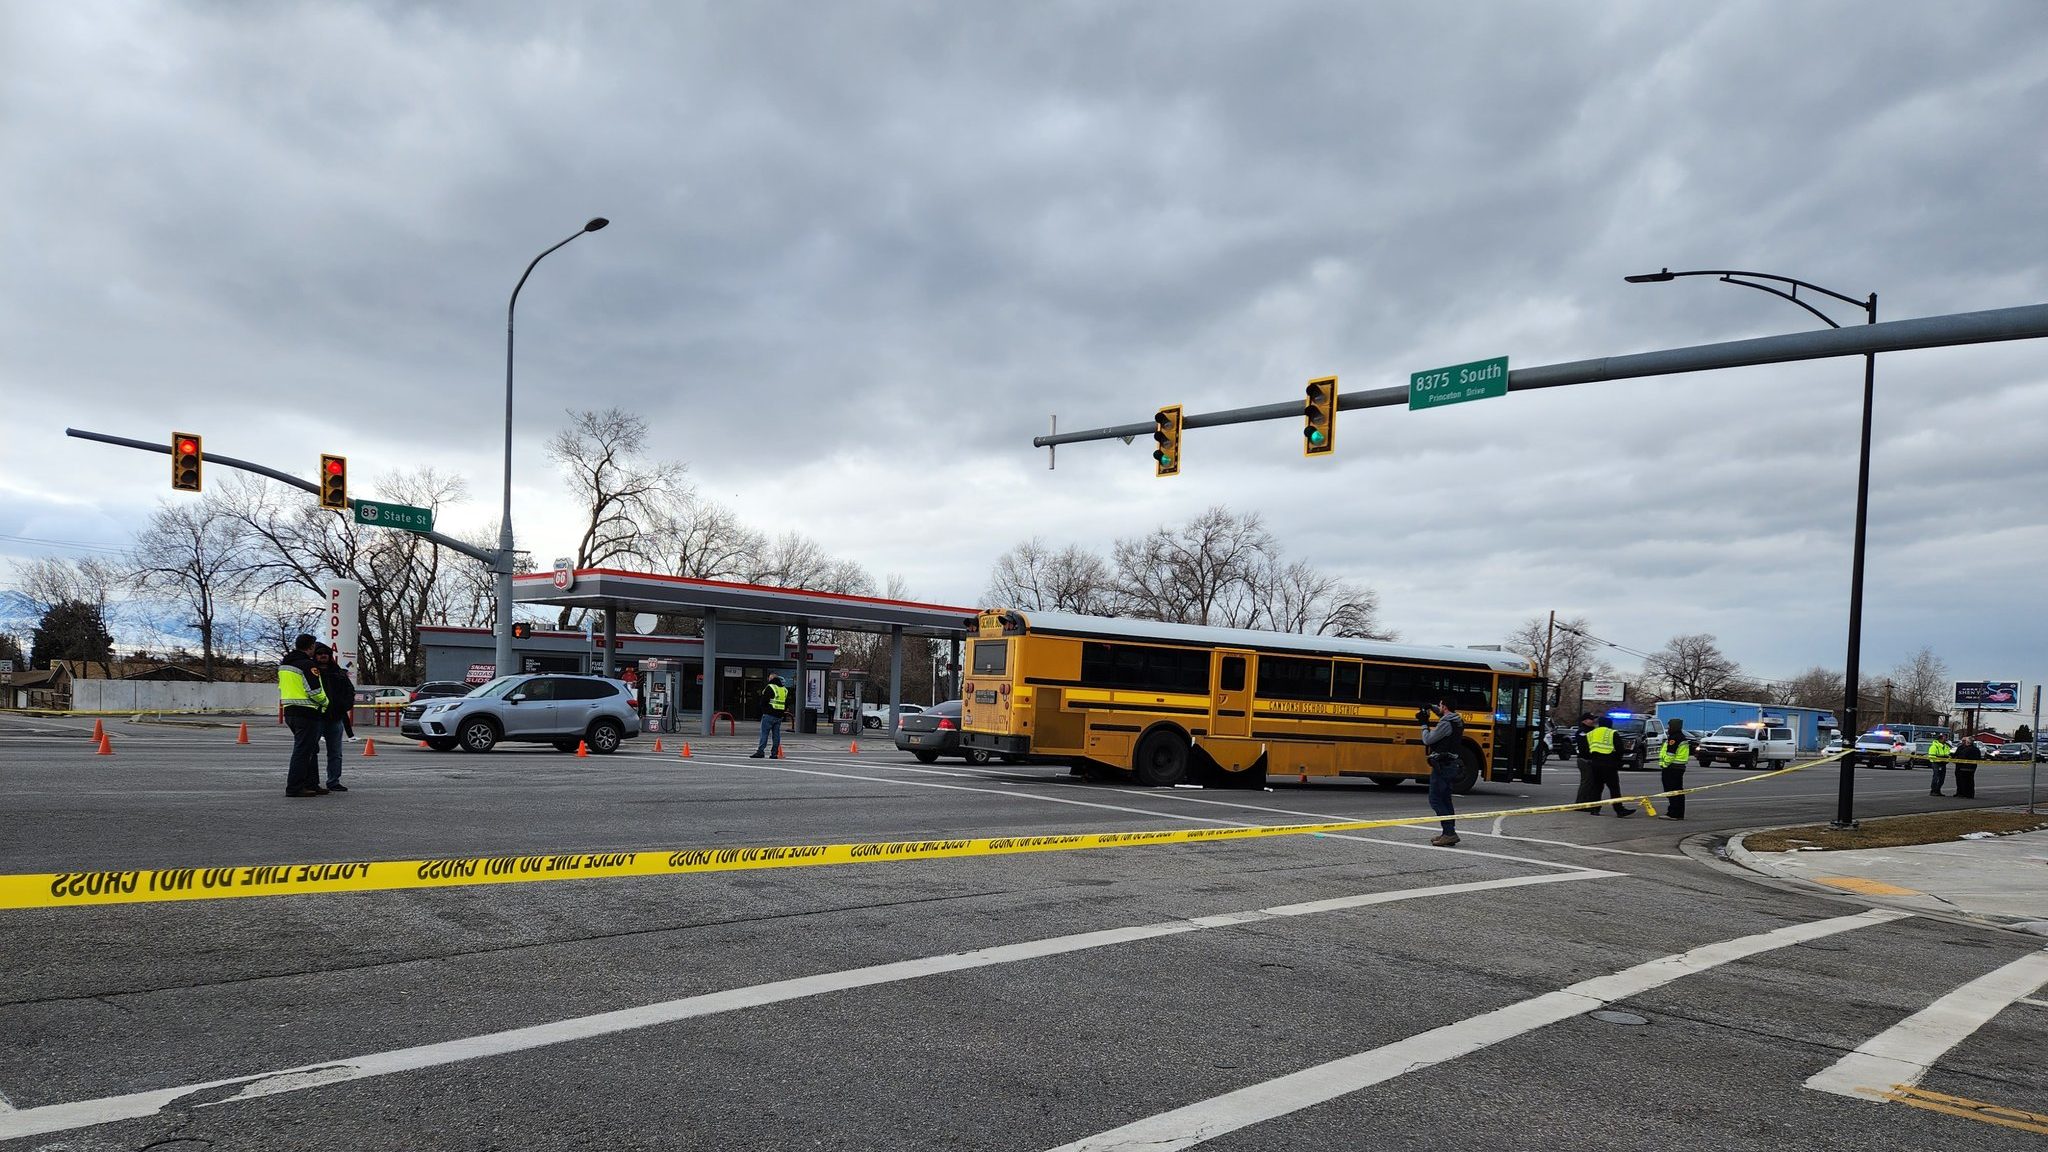 A 15-year-old girl was killed in a crosswalk on Friday when she was hit by a school bus in Sandy. T...